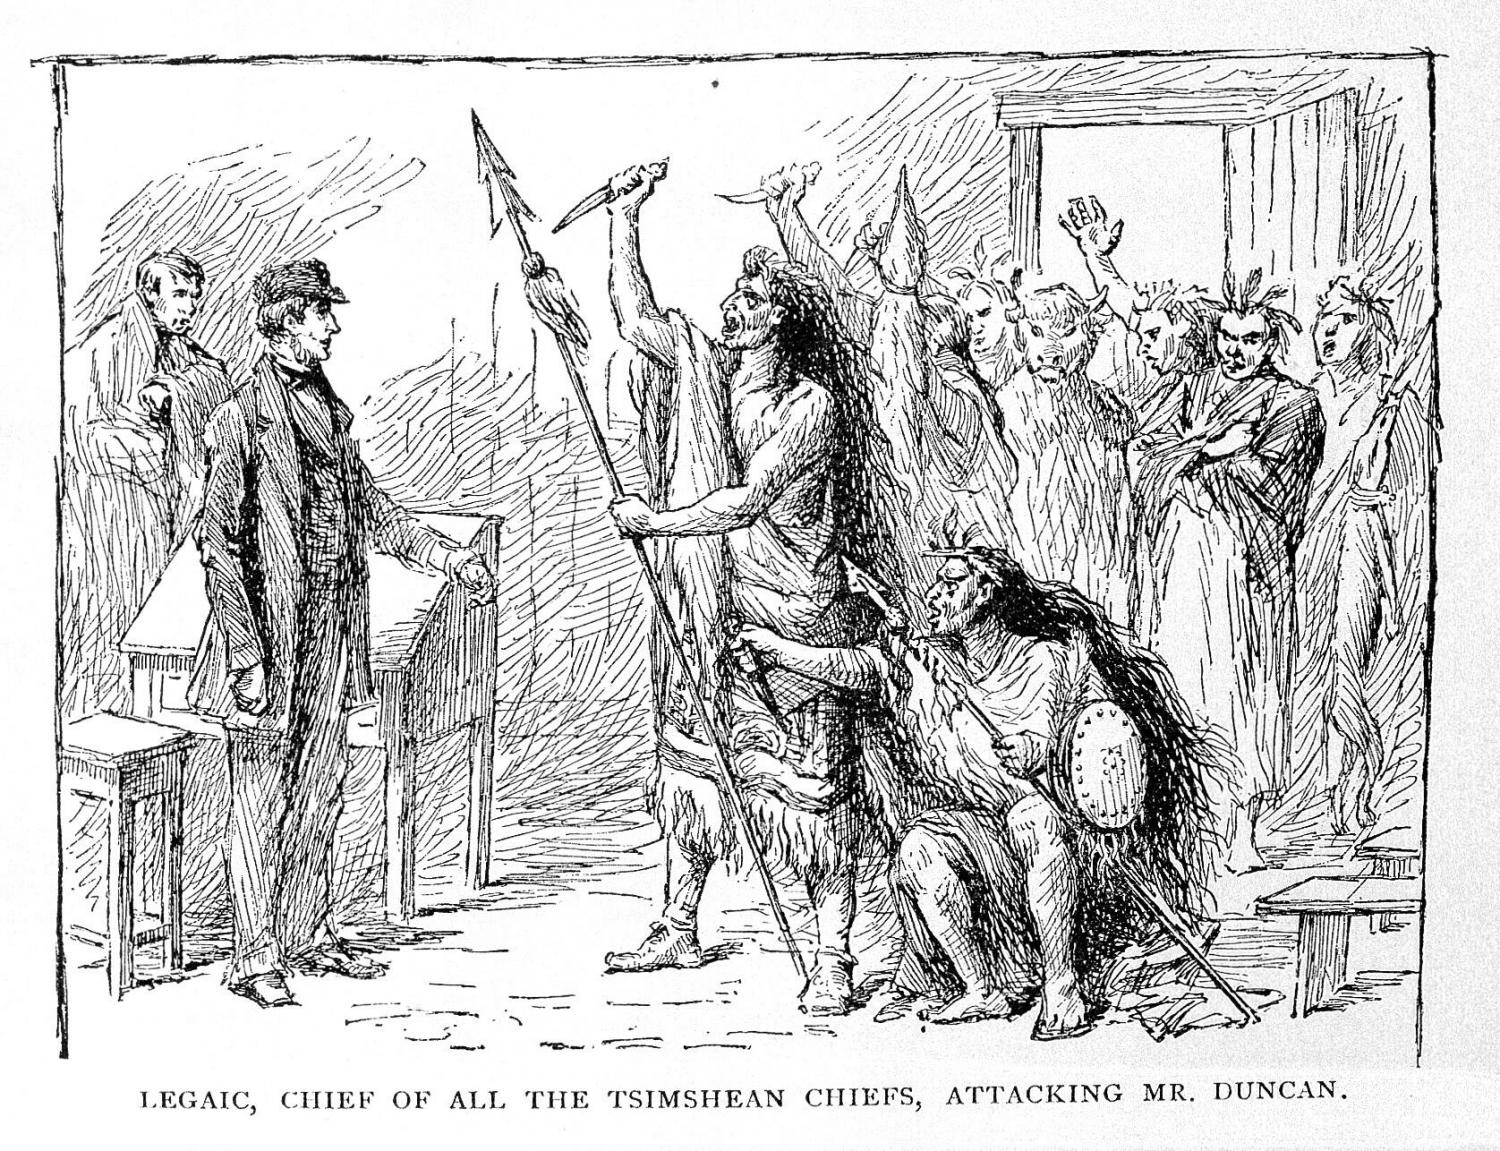 Illustration between page 12 & 13: Legaic, chief of all the Tsimshean chiefs, attacking Mr Duncan.